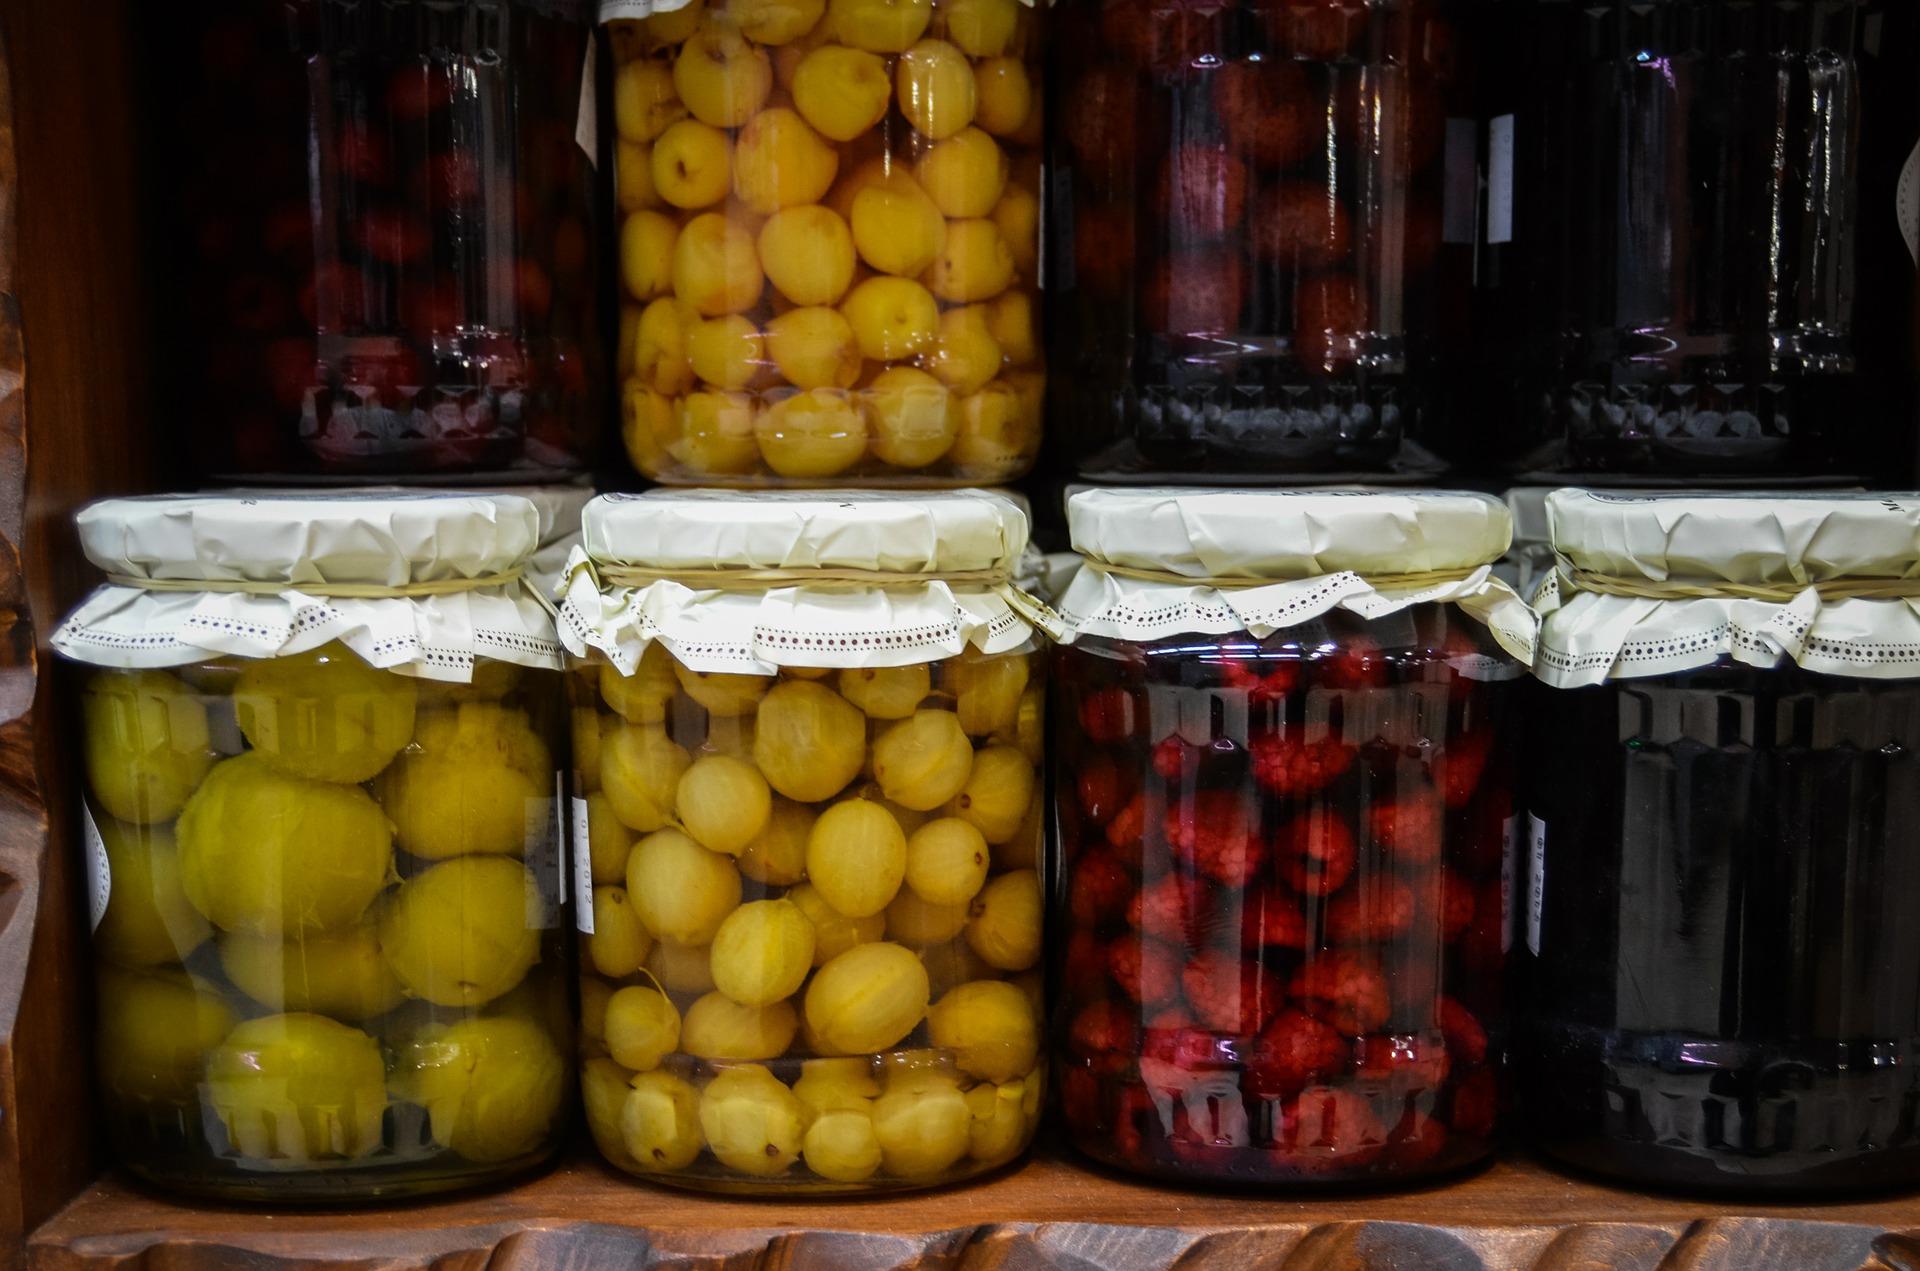 Jars of Romanian preserves, jams and compotes which are so delicious and perfect for foodies who visit Romania